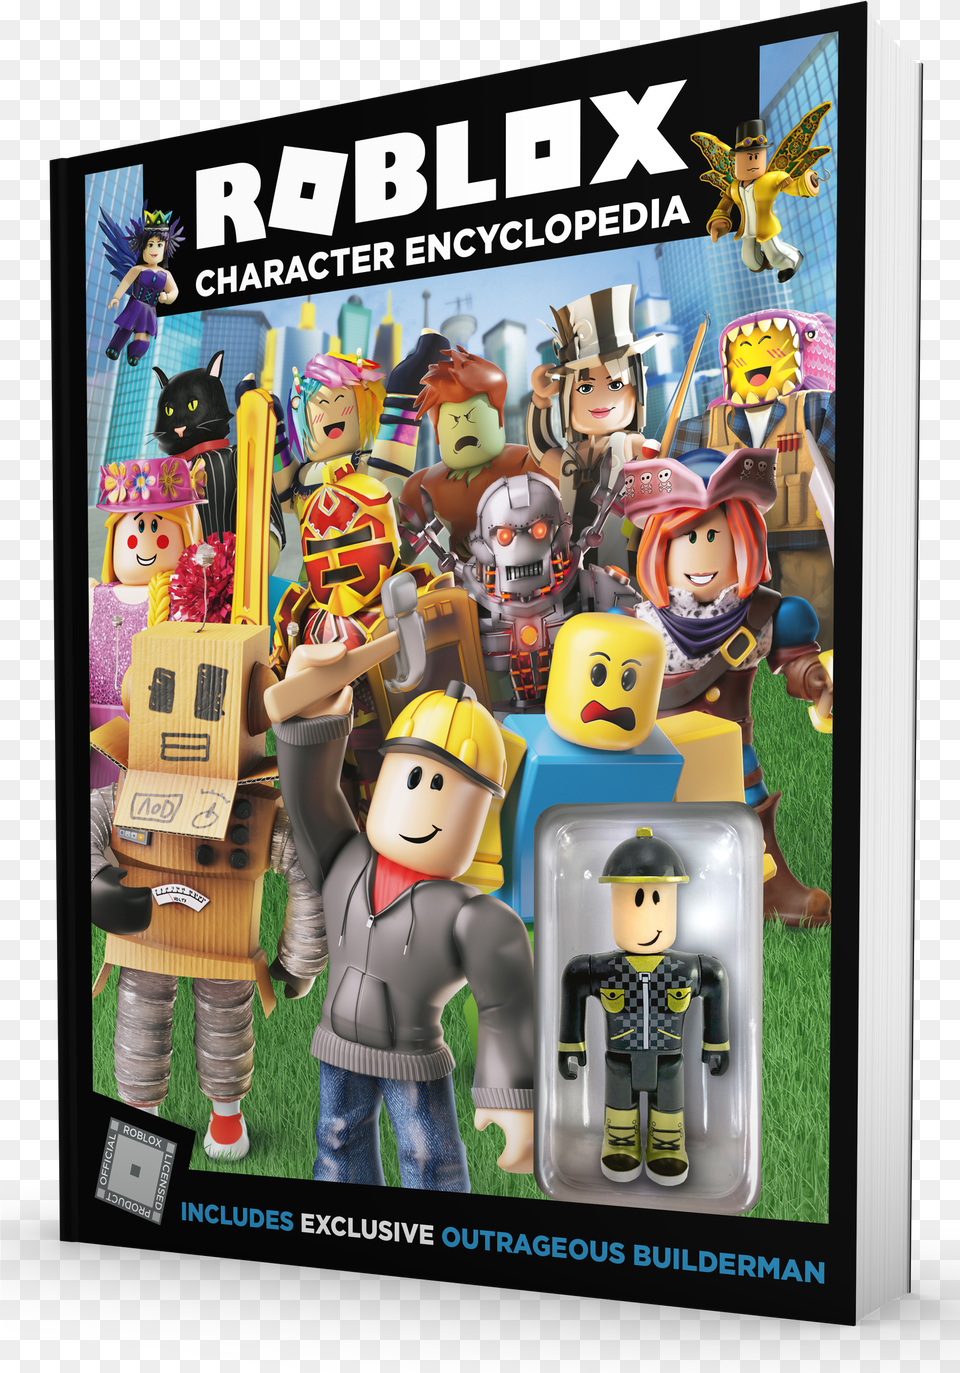 Roblox Books Launching September 2018 Egmont Uk Roblox Character Encyclopedia Roblox Free Png Download